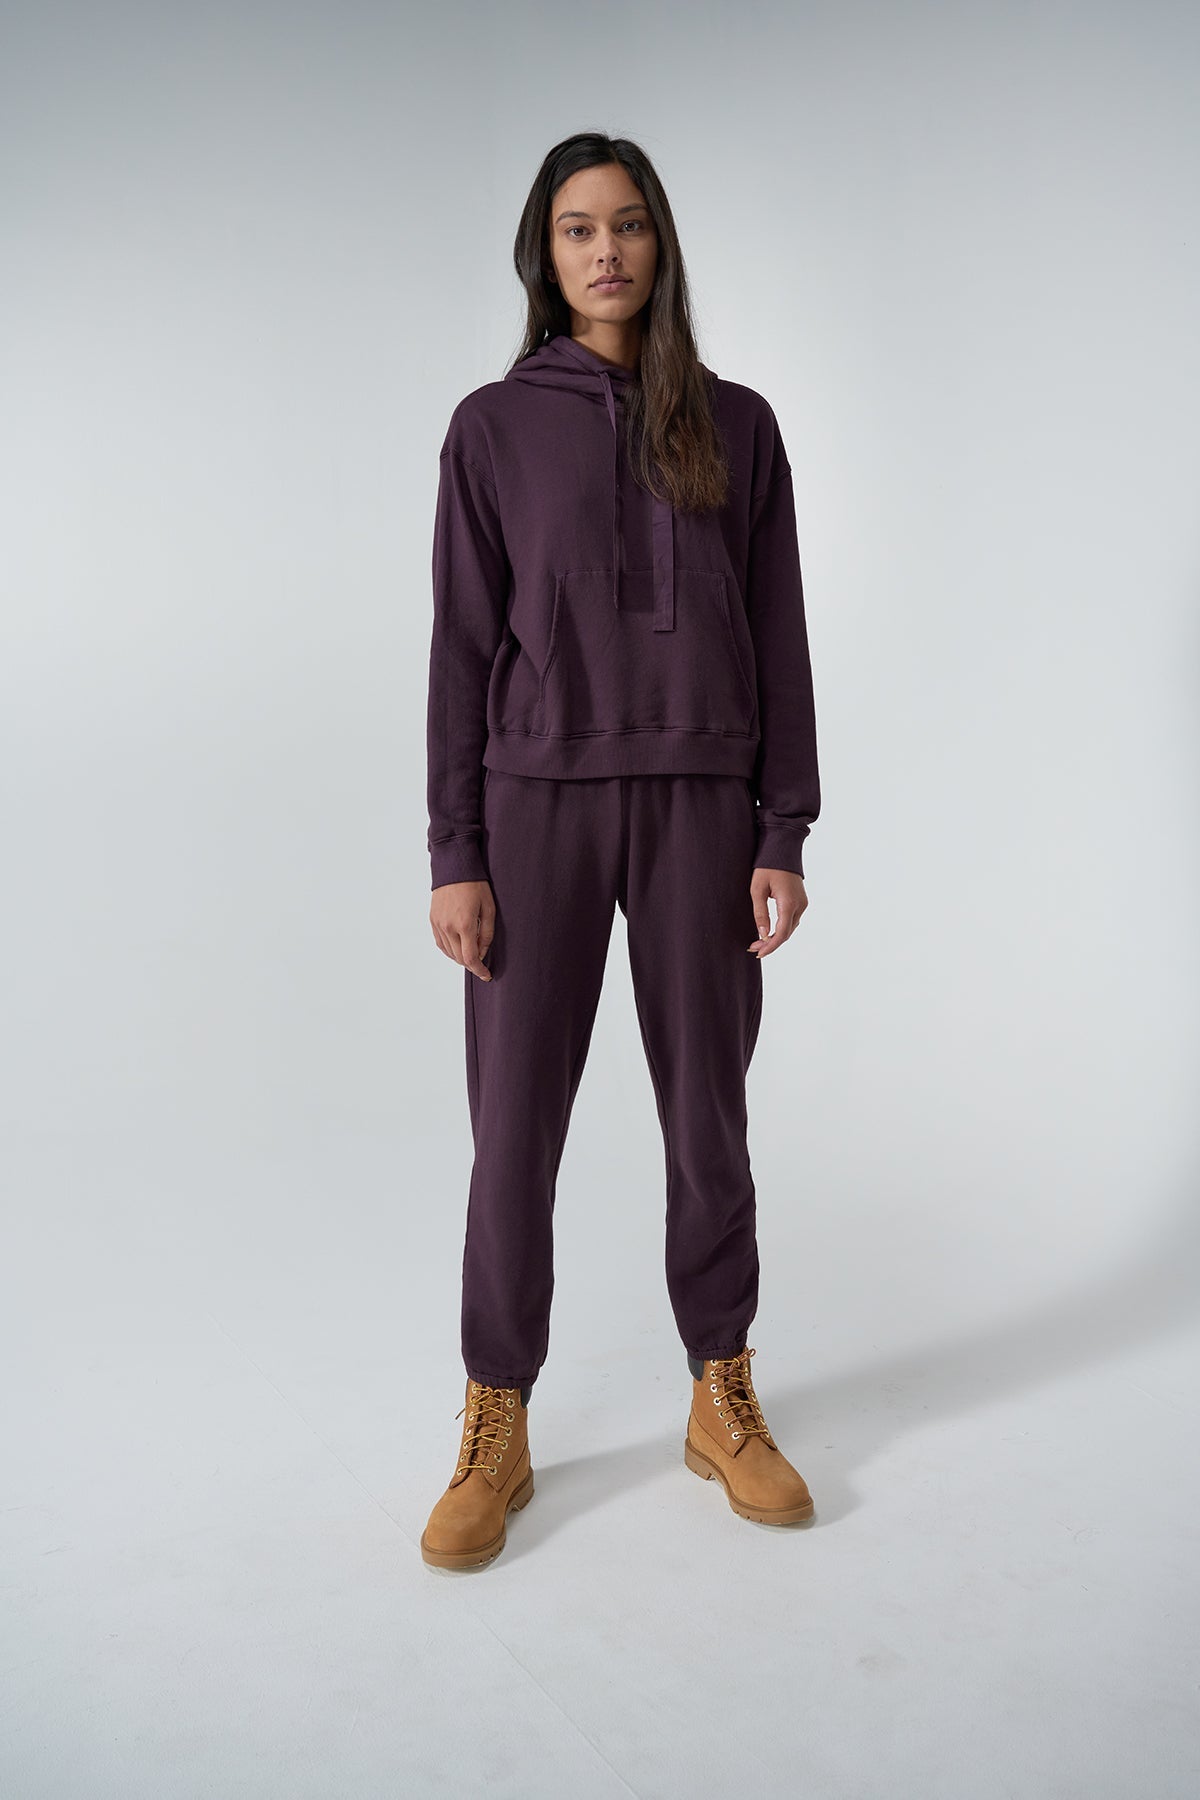   Ojai Hoodie Mulberry with Zuma Sweatpant Mulberry Front 2 